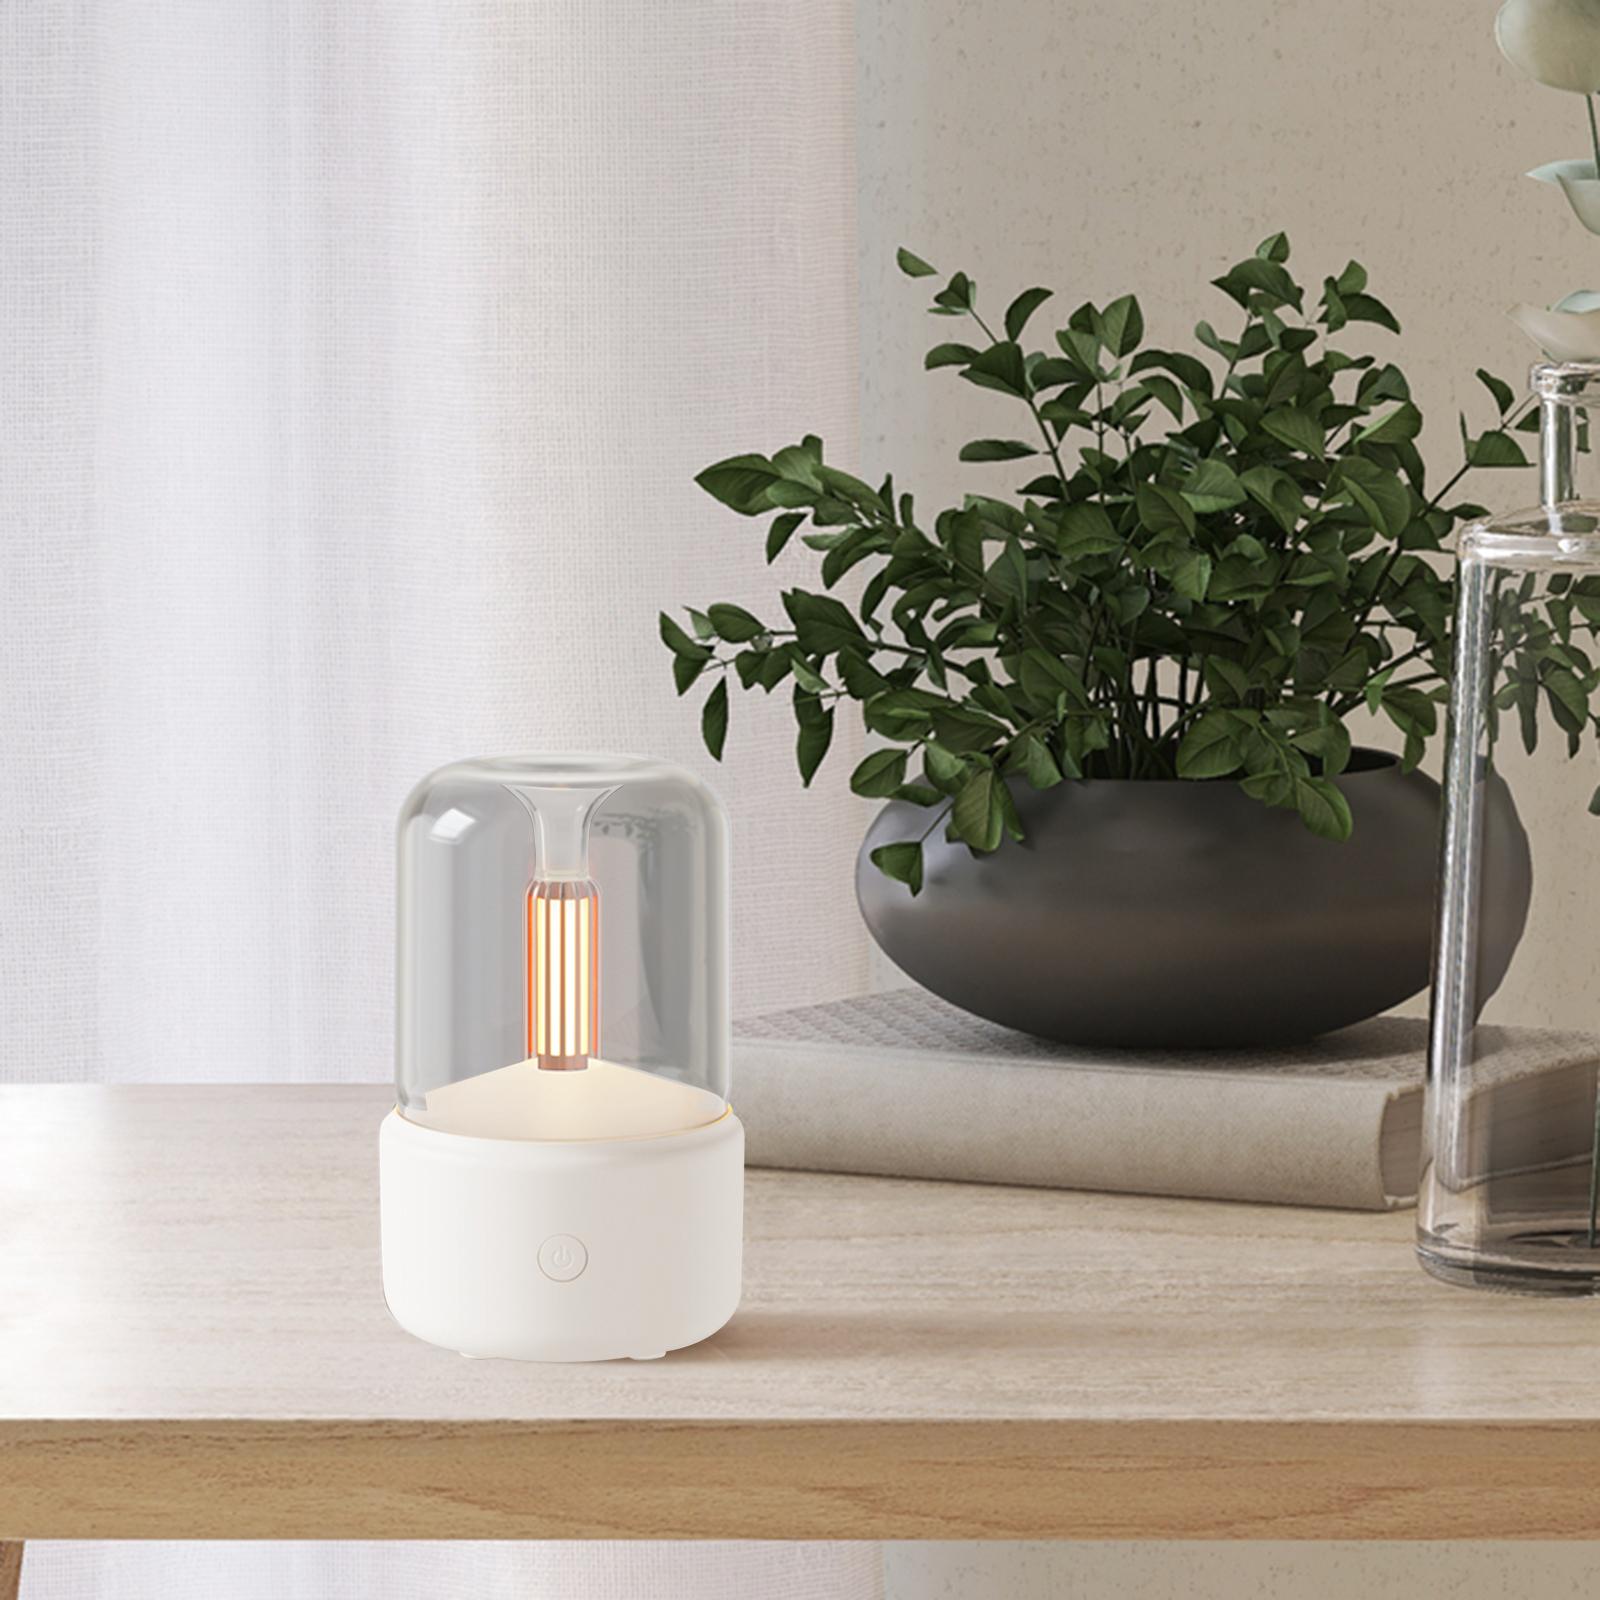 Aroma Diffuser Atmosphere Light Practical Humidifier for Restaurant